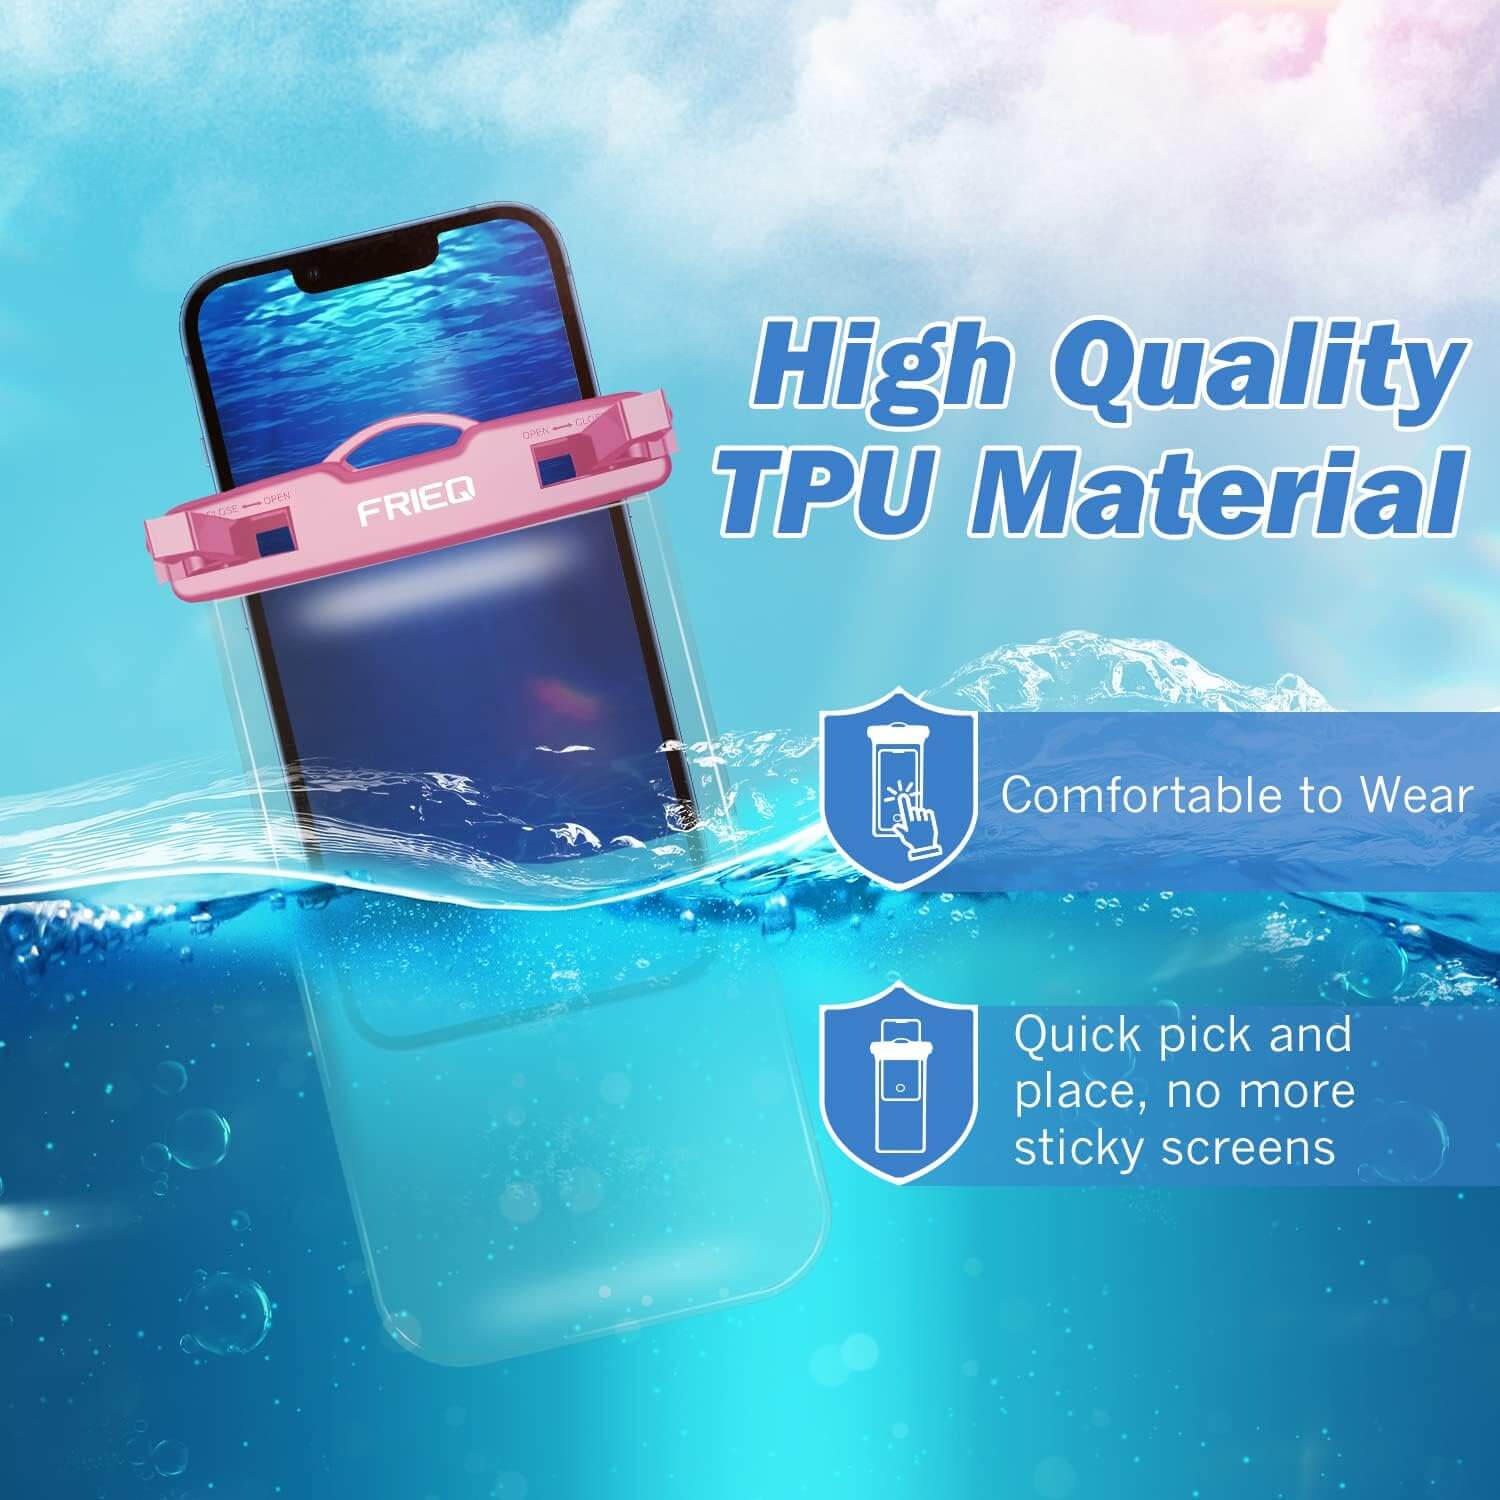 FRiEQ Waterproof Phone Pouch Bag - 2 Pack, Universal IPX8 Waterproof Phone Case Dry Bag with Lanyard for iPhone 15/14/13/12/11 Pro Max Samsung Galaxy S22 S20 and More Up to 7in (Black and Pink) - High Quality TPU Material